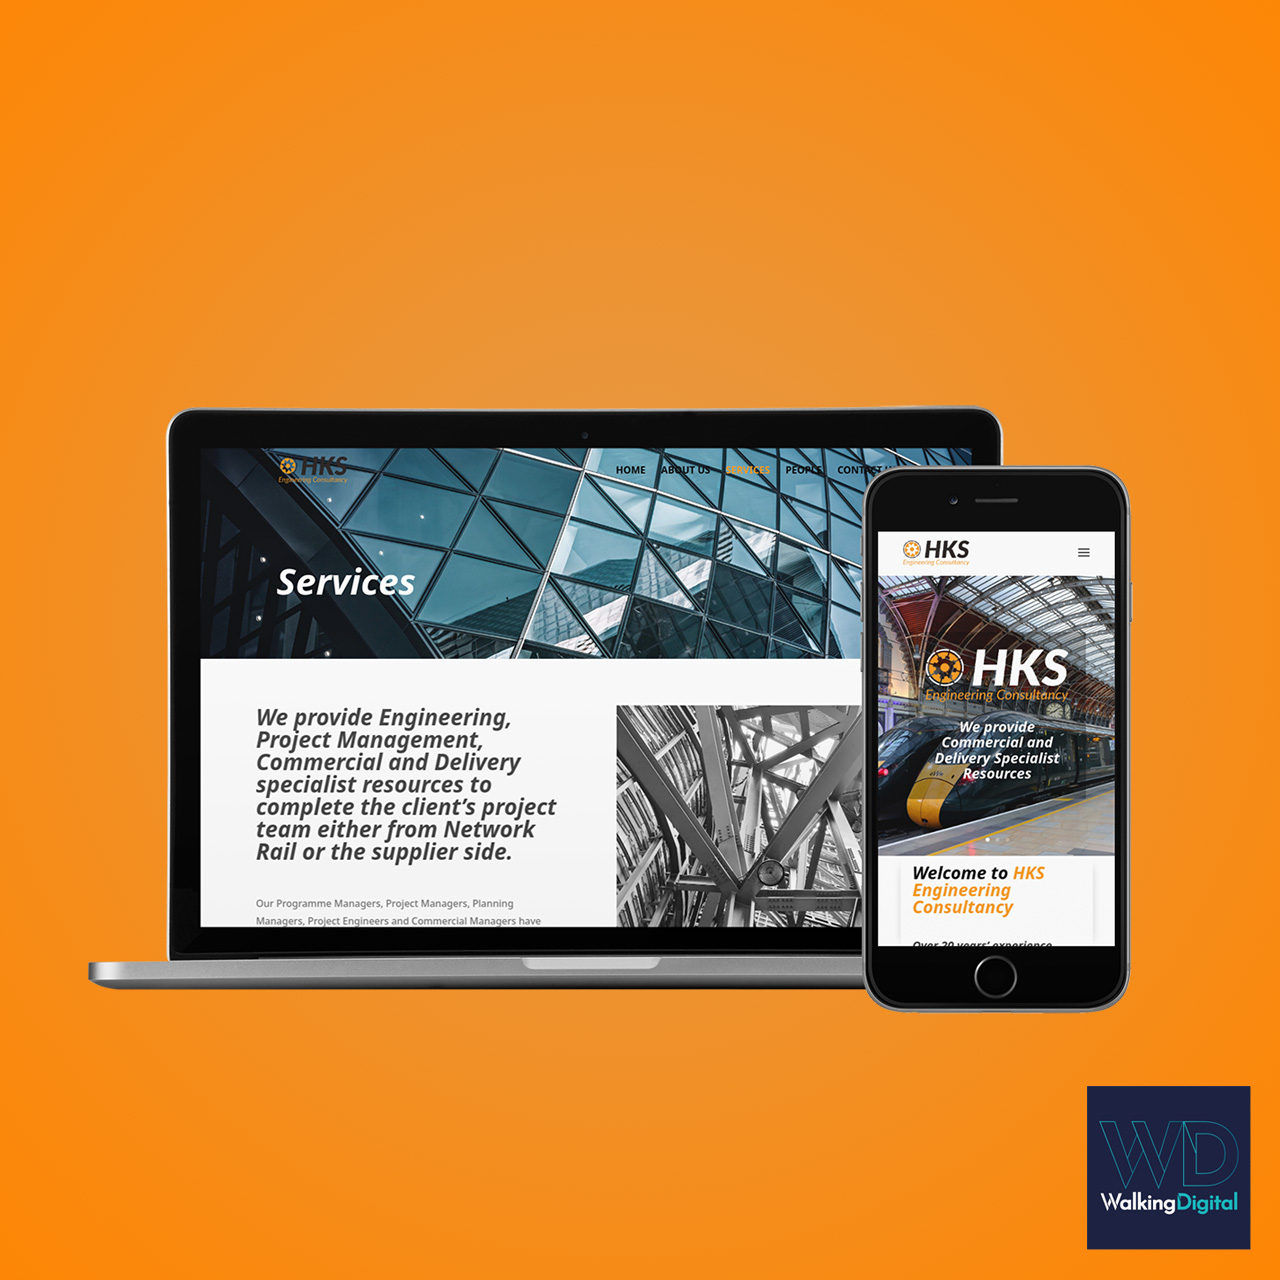 HKS Engineering Consultancy website on multiple devices